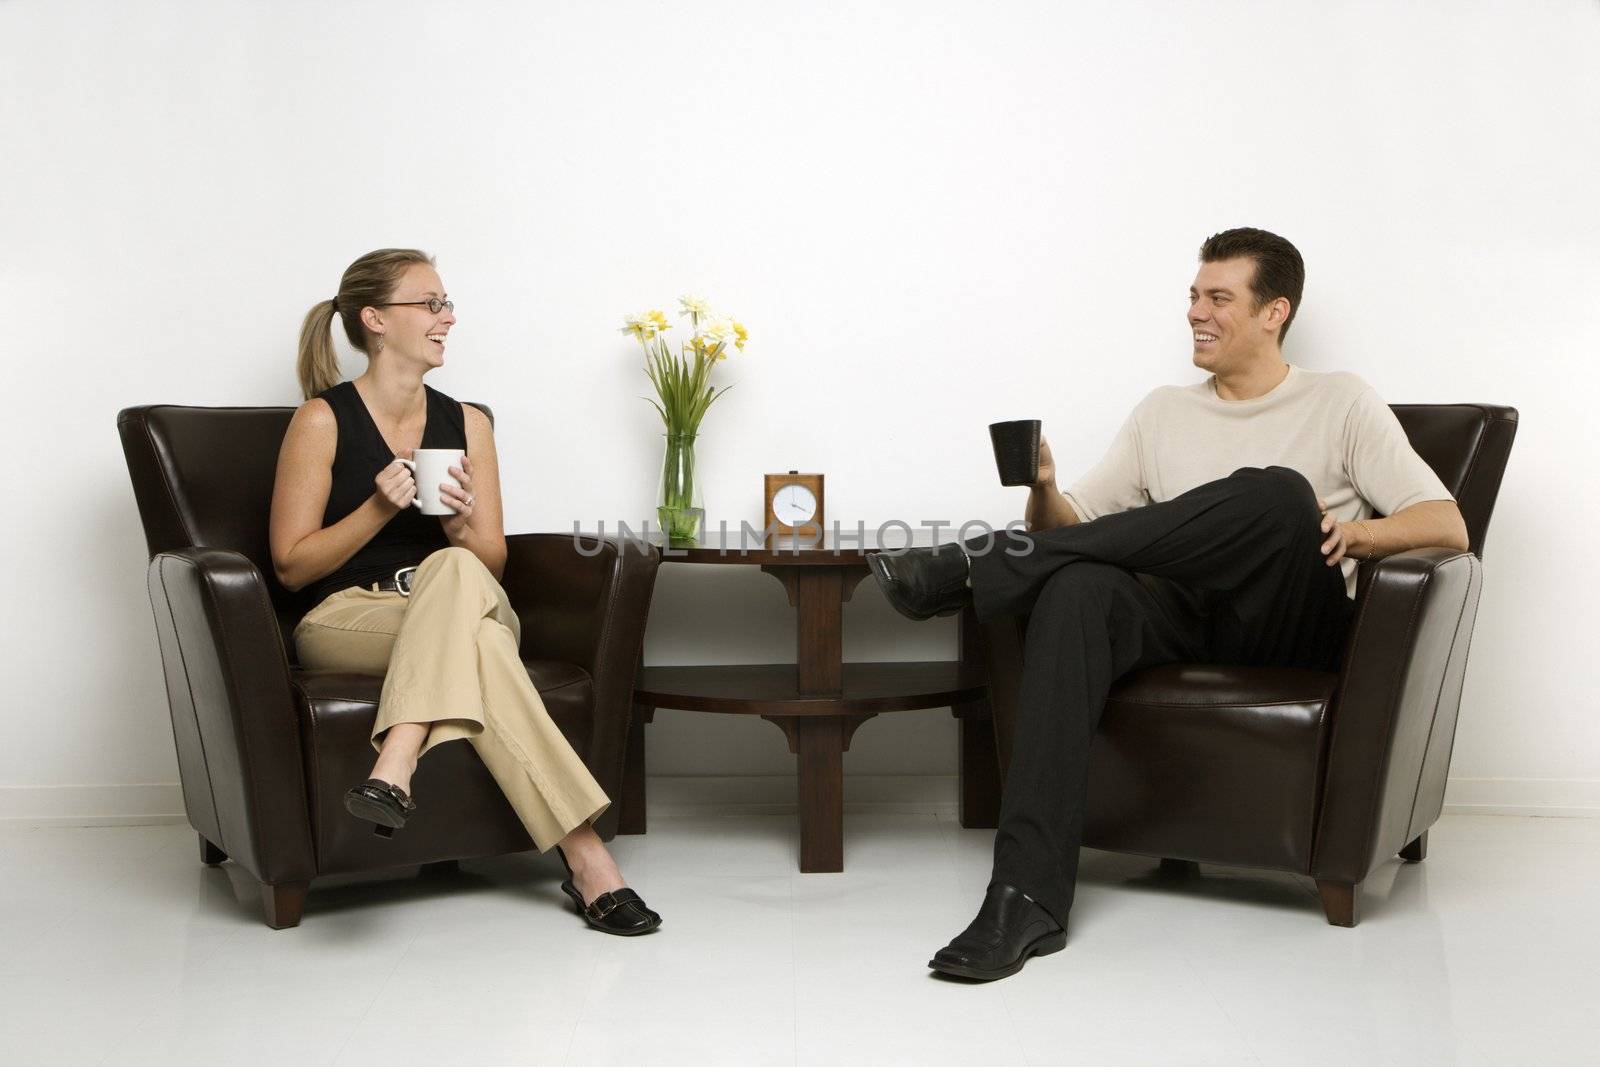 Caucasian mid-adult man and woman sitting in armchairs drinking coffee.